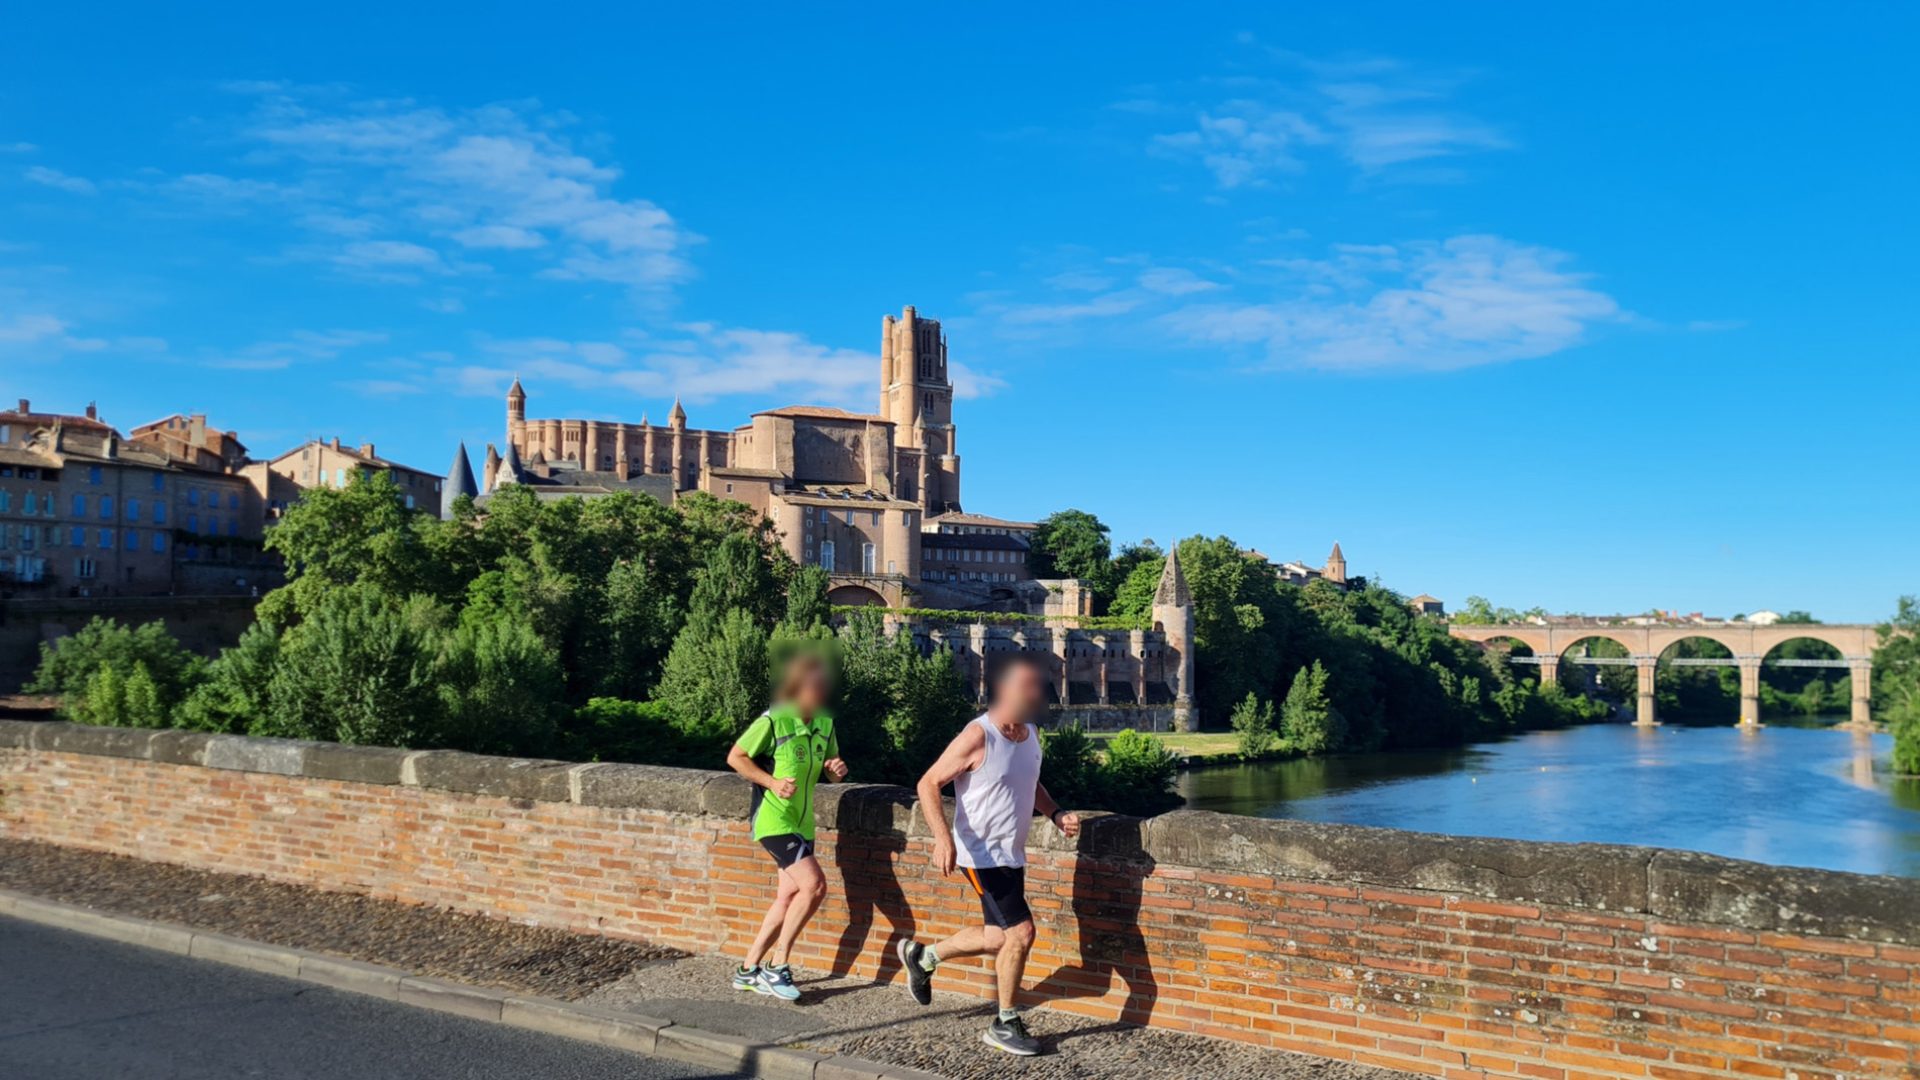 Get moving to Albi! Sports and leisure activities in Albi, hiking, cycling, running, swimming,